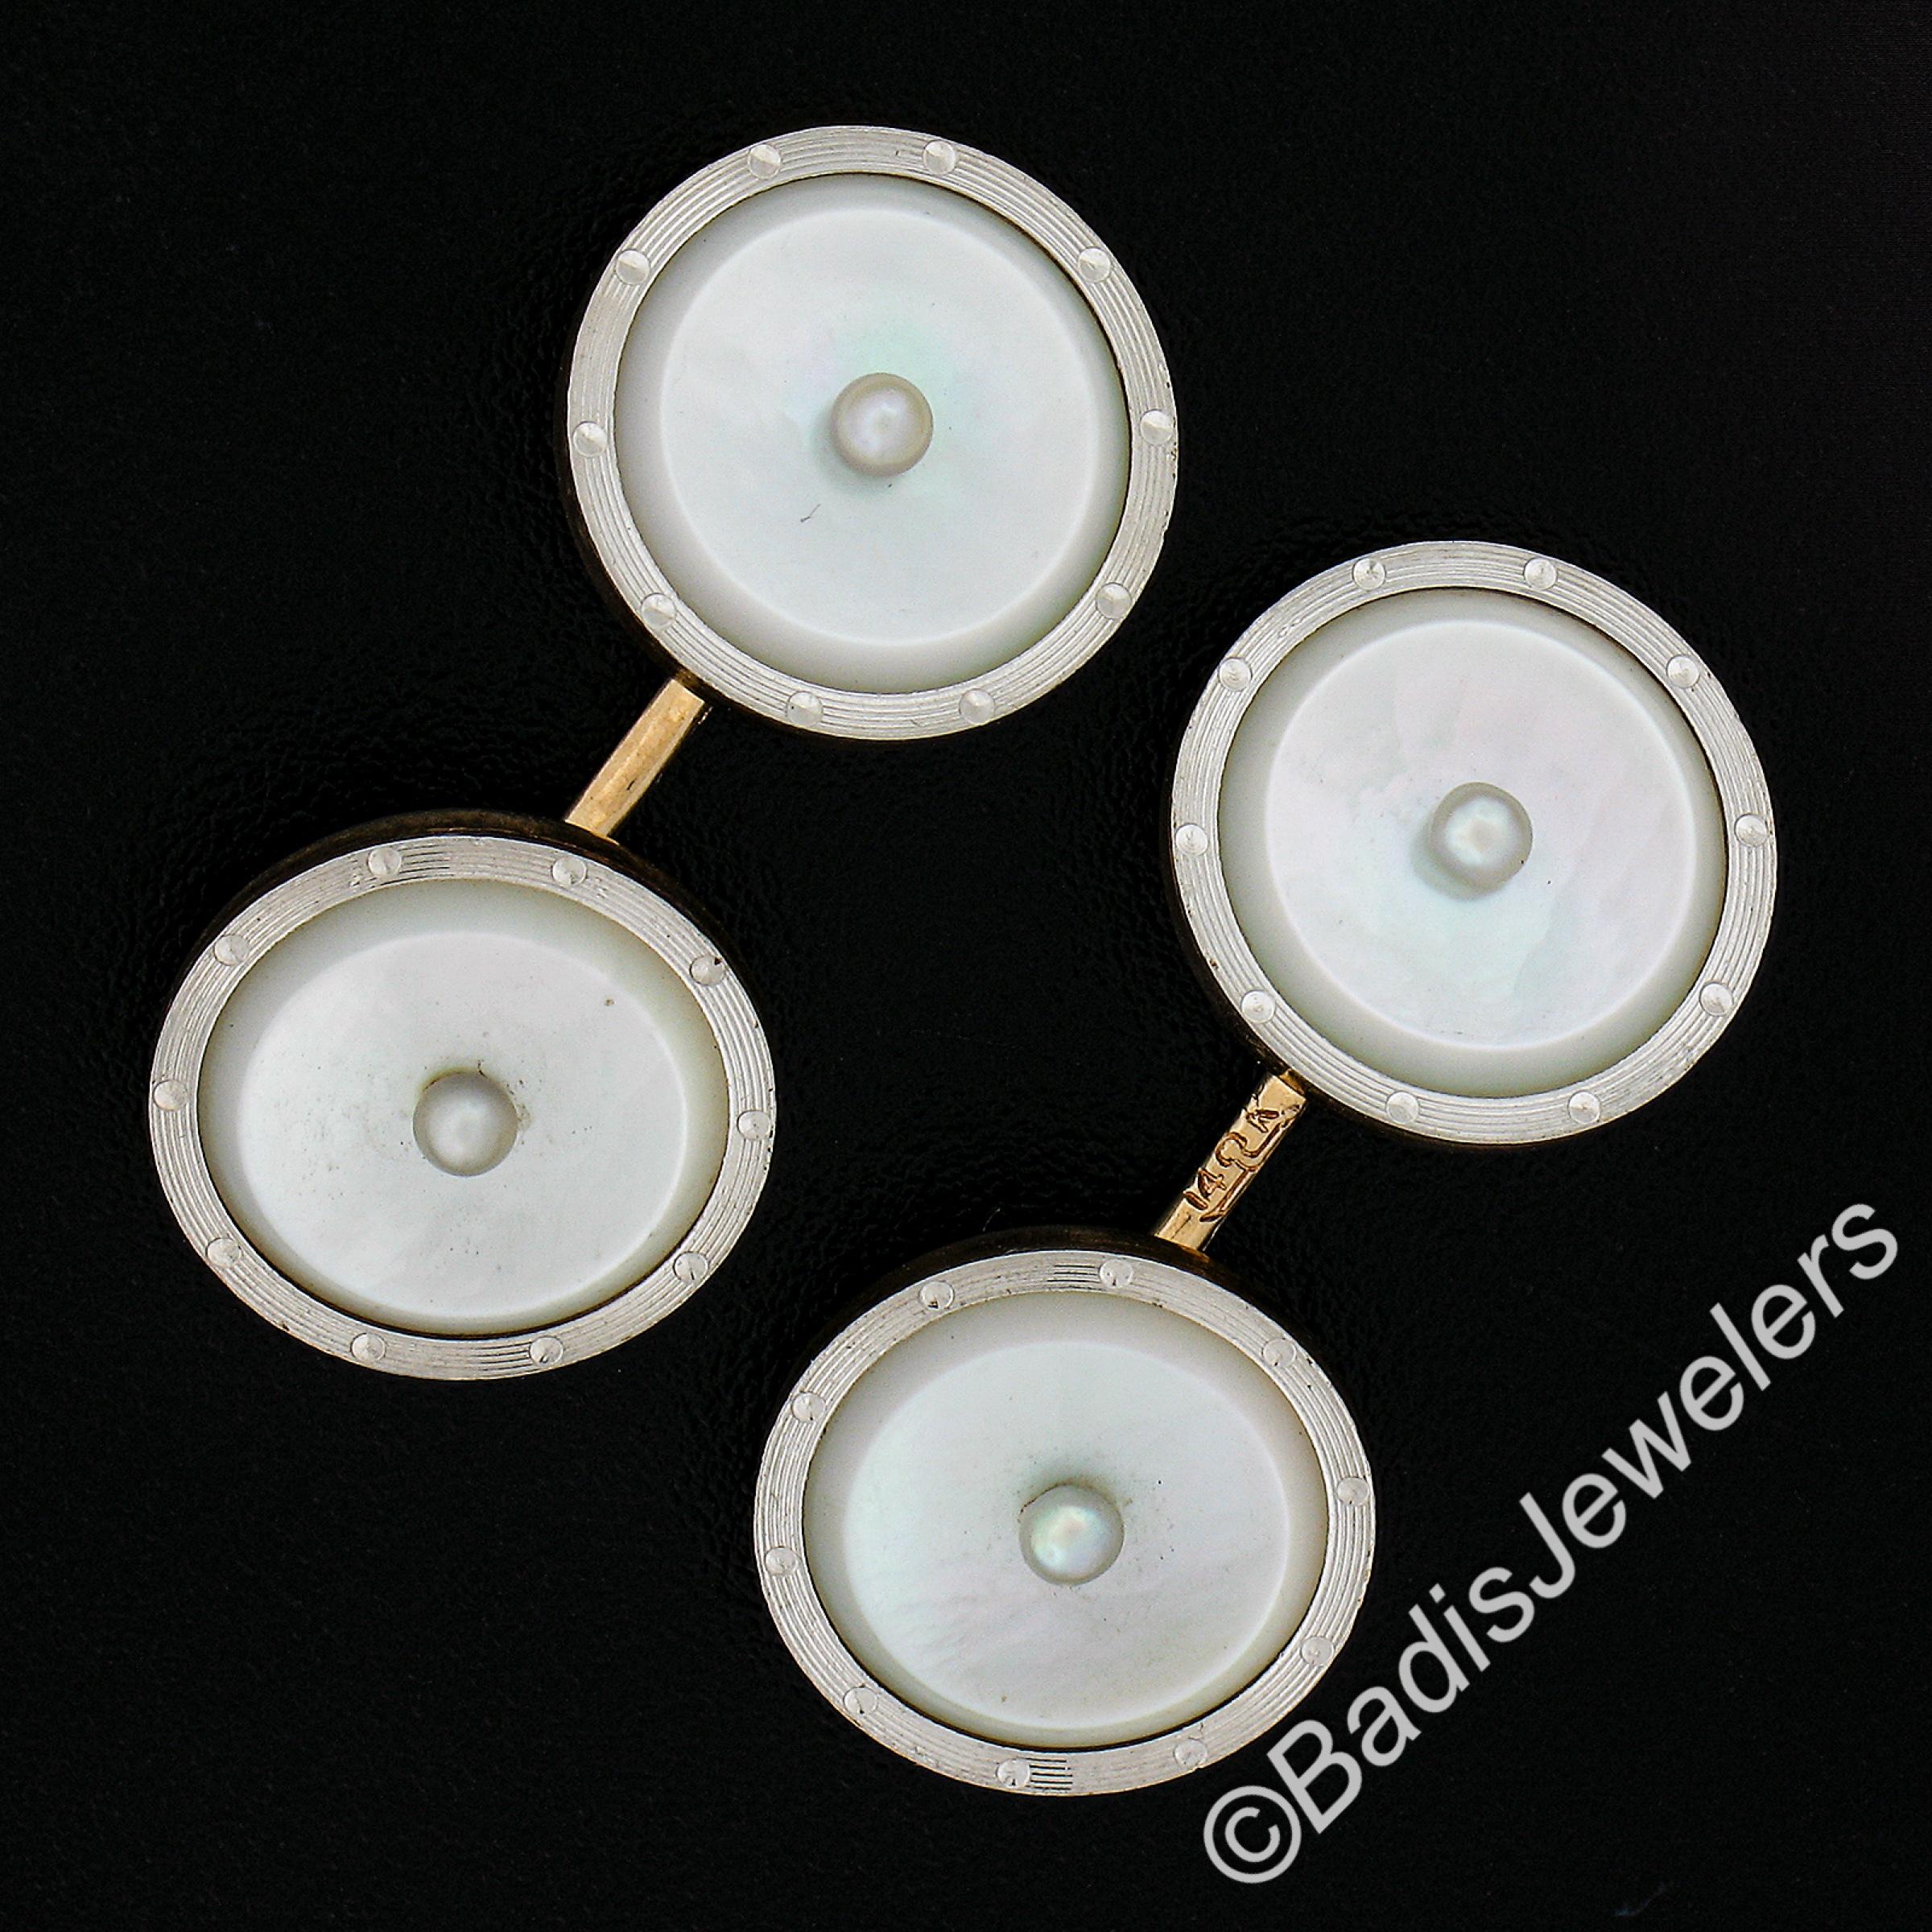 --Stone(s):--
(4) Natural Genuine Black Mother of Pearl - Round Shape - Bezel Set - White Color w/ Green & Pink Overtone - 11.2mm each (approx.)
(4) Cultured Seed Pearls - Round Shape - Stem Set - White Color - 2.3mm each (approx.)

Material: Solid